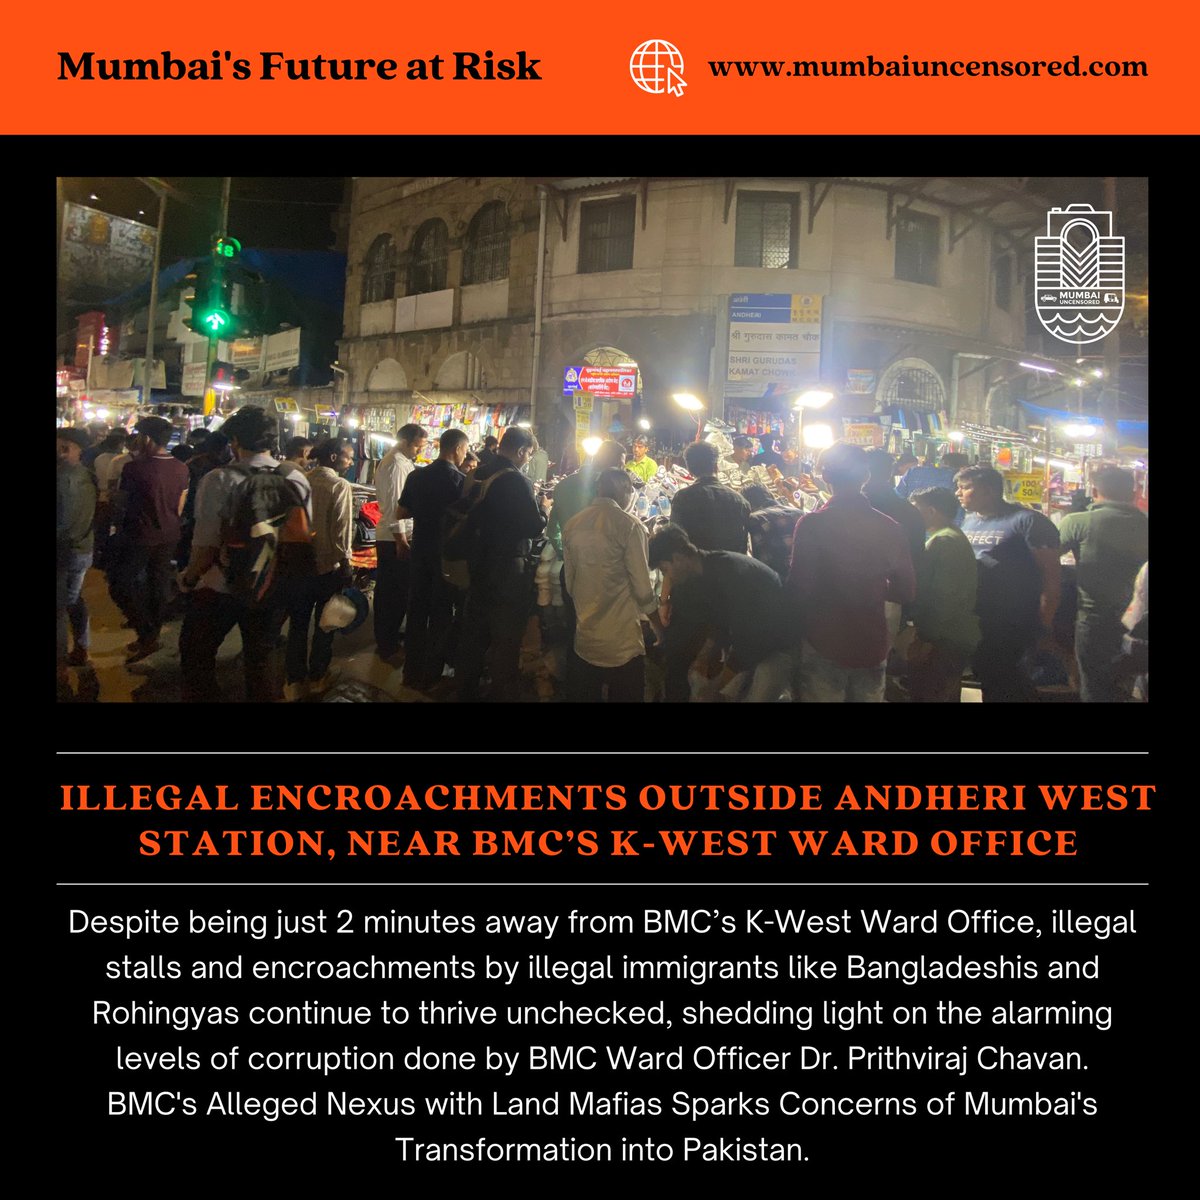 Illegal Bangladeshis & Rohingya Immigrants encroach upon prime locations in Mumbai, including areas outside Andheri W Station. Dr. Prithviraj Chavan, Ward Officer of @mybmcwardKW, must address this issue immediately. If he proves incapable of taking action, he must be suspended.